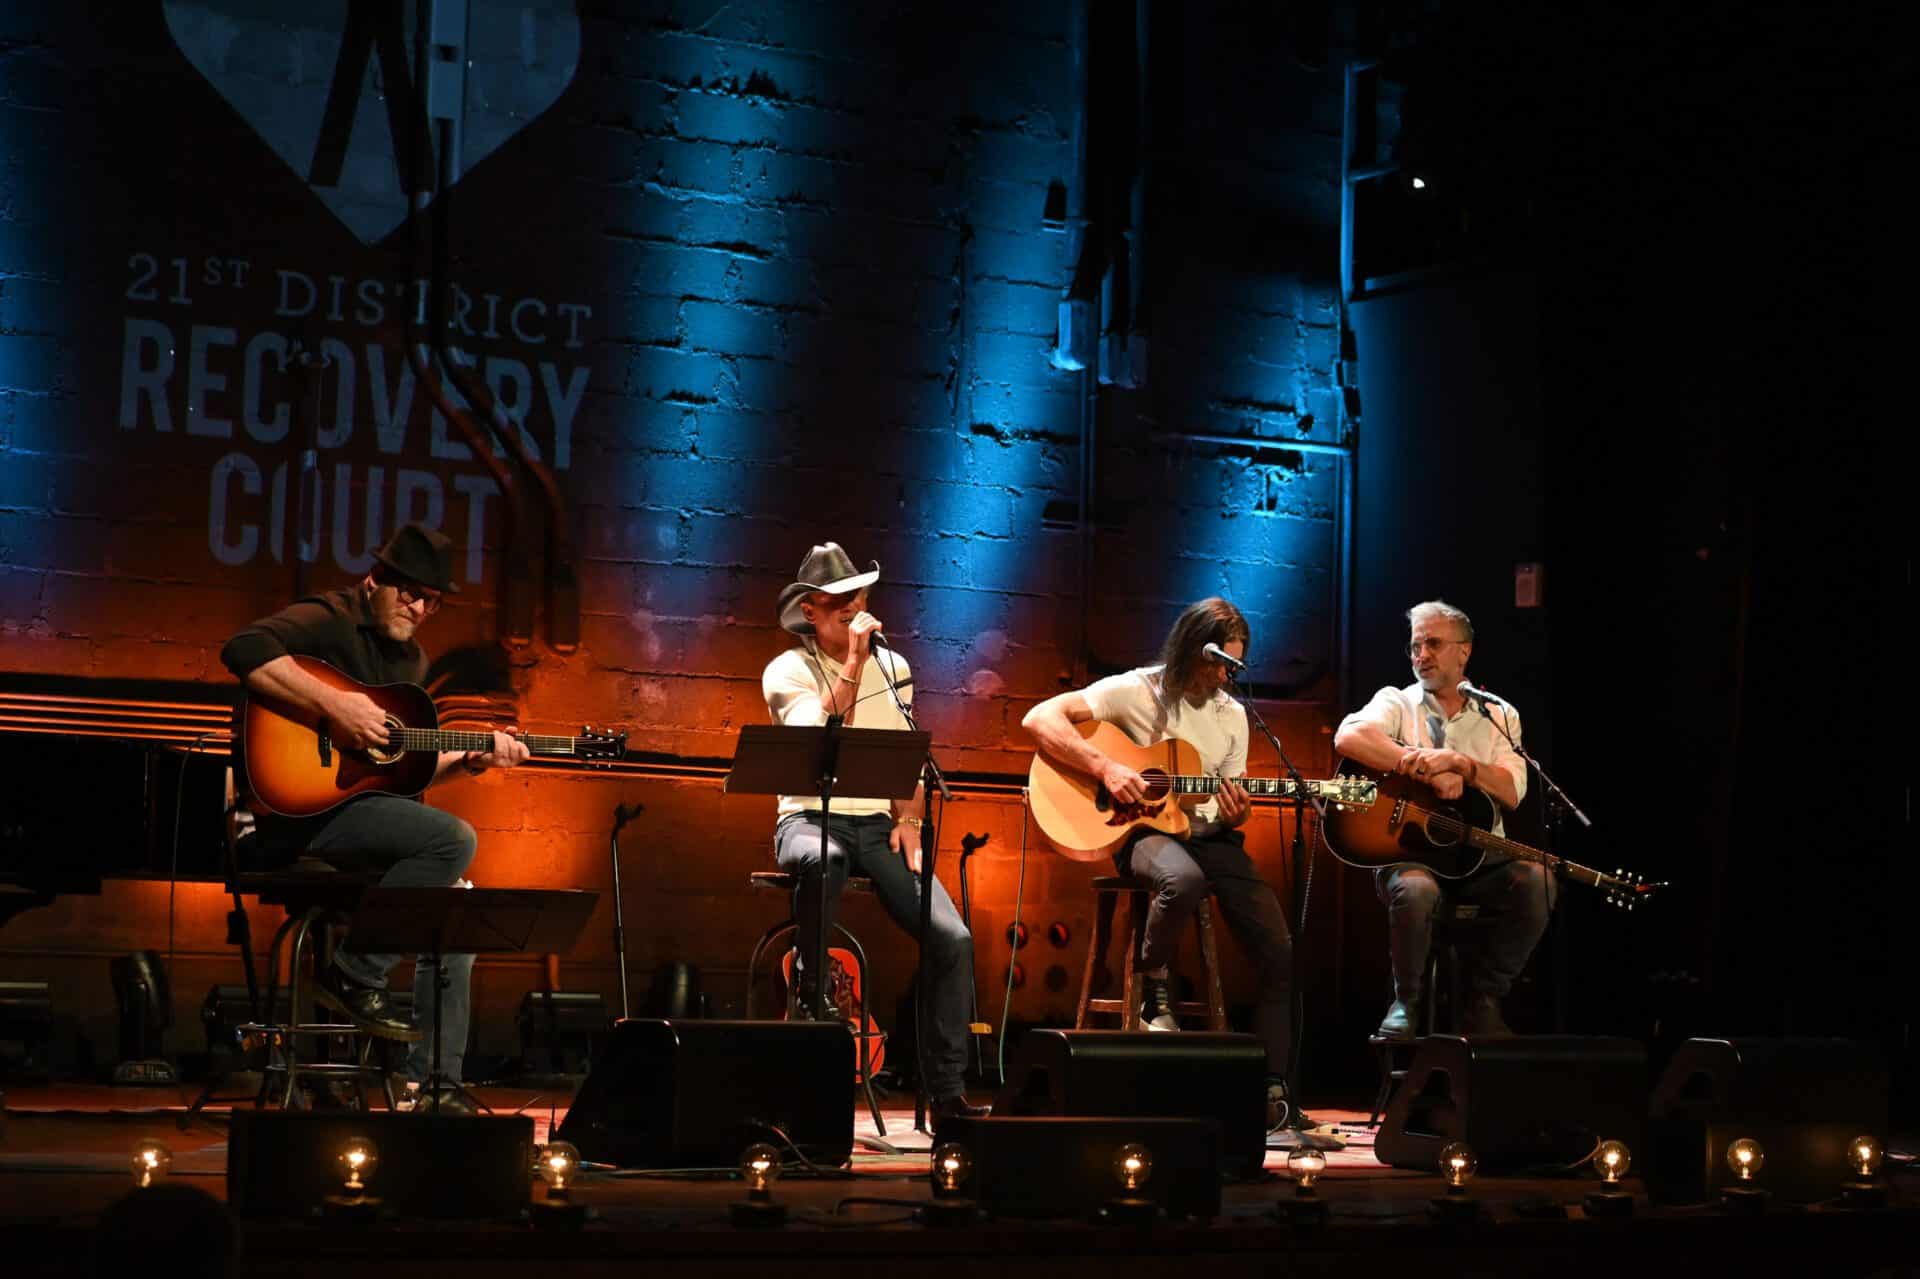 Tim McGraw performs to sold-out crowd in downtown Franklin at The Franklin Theatre for Recovery Court fundraiser - PeytonHoge photos-067